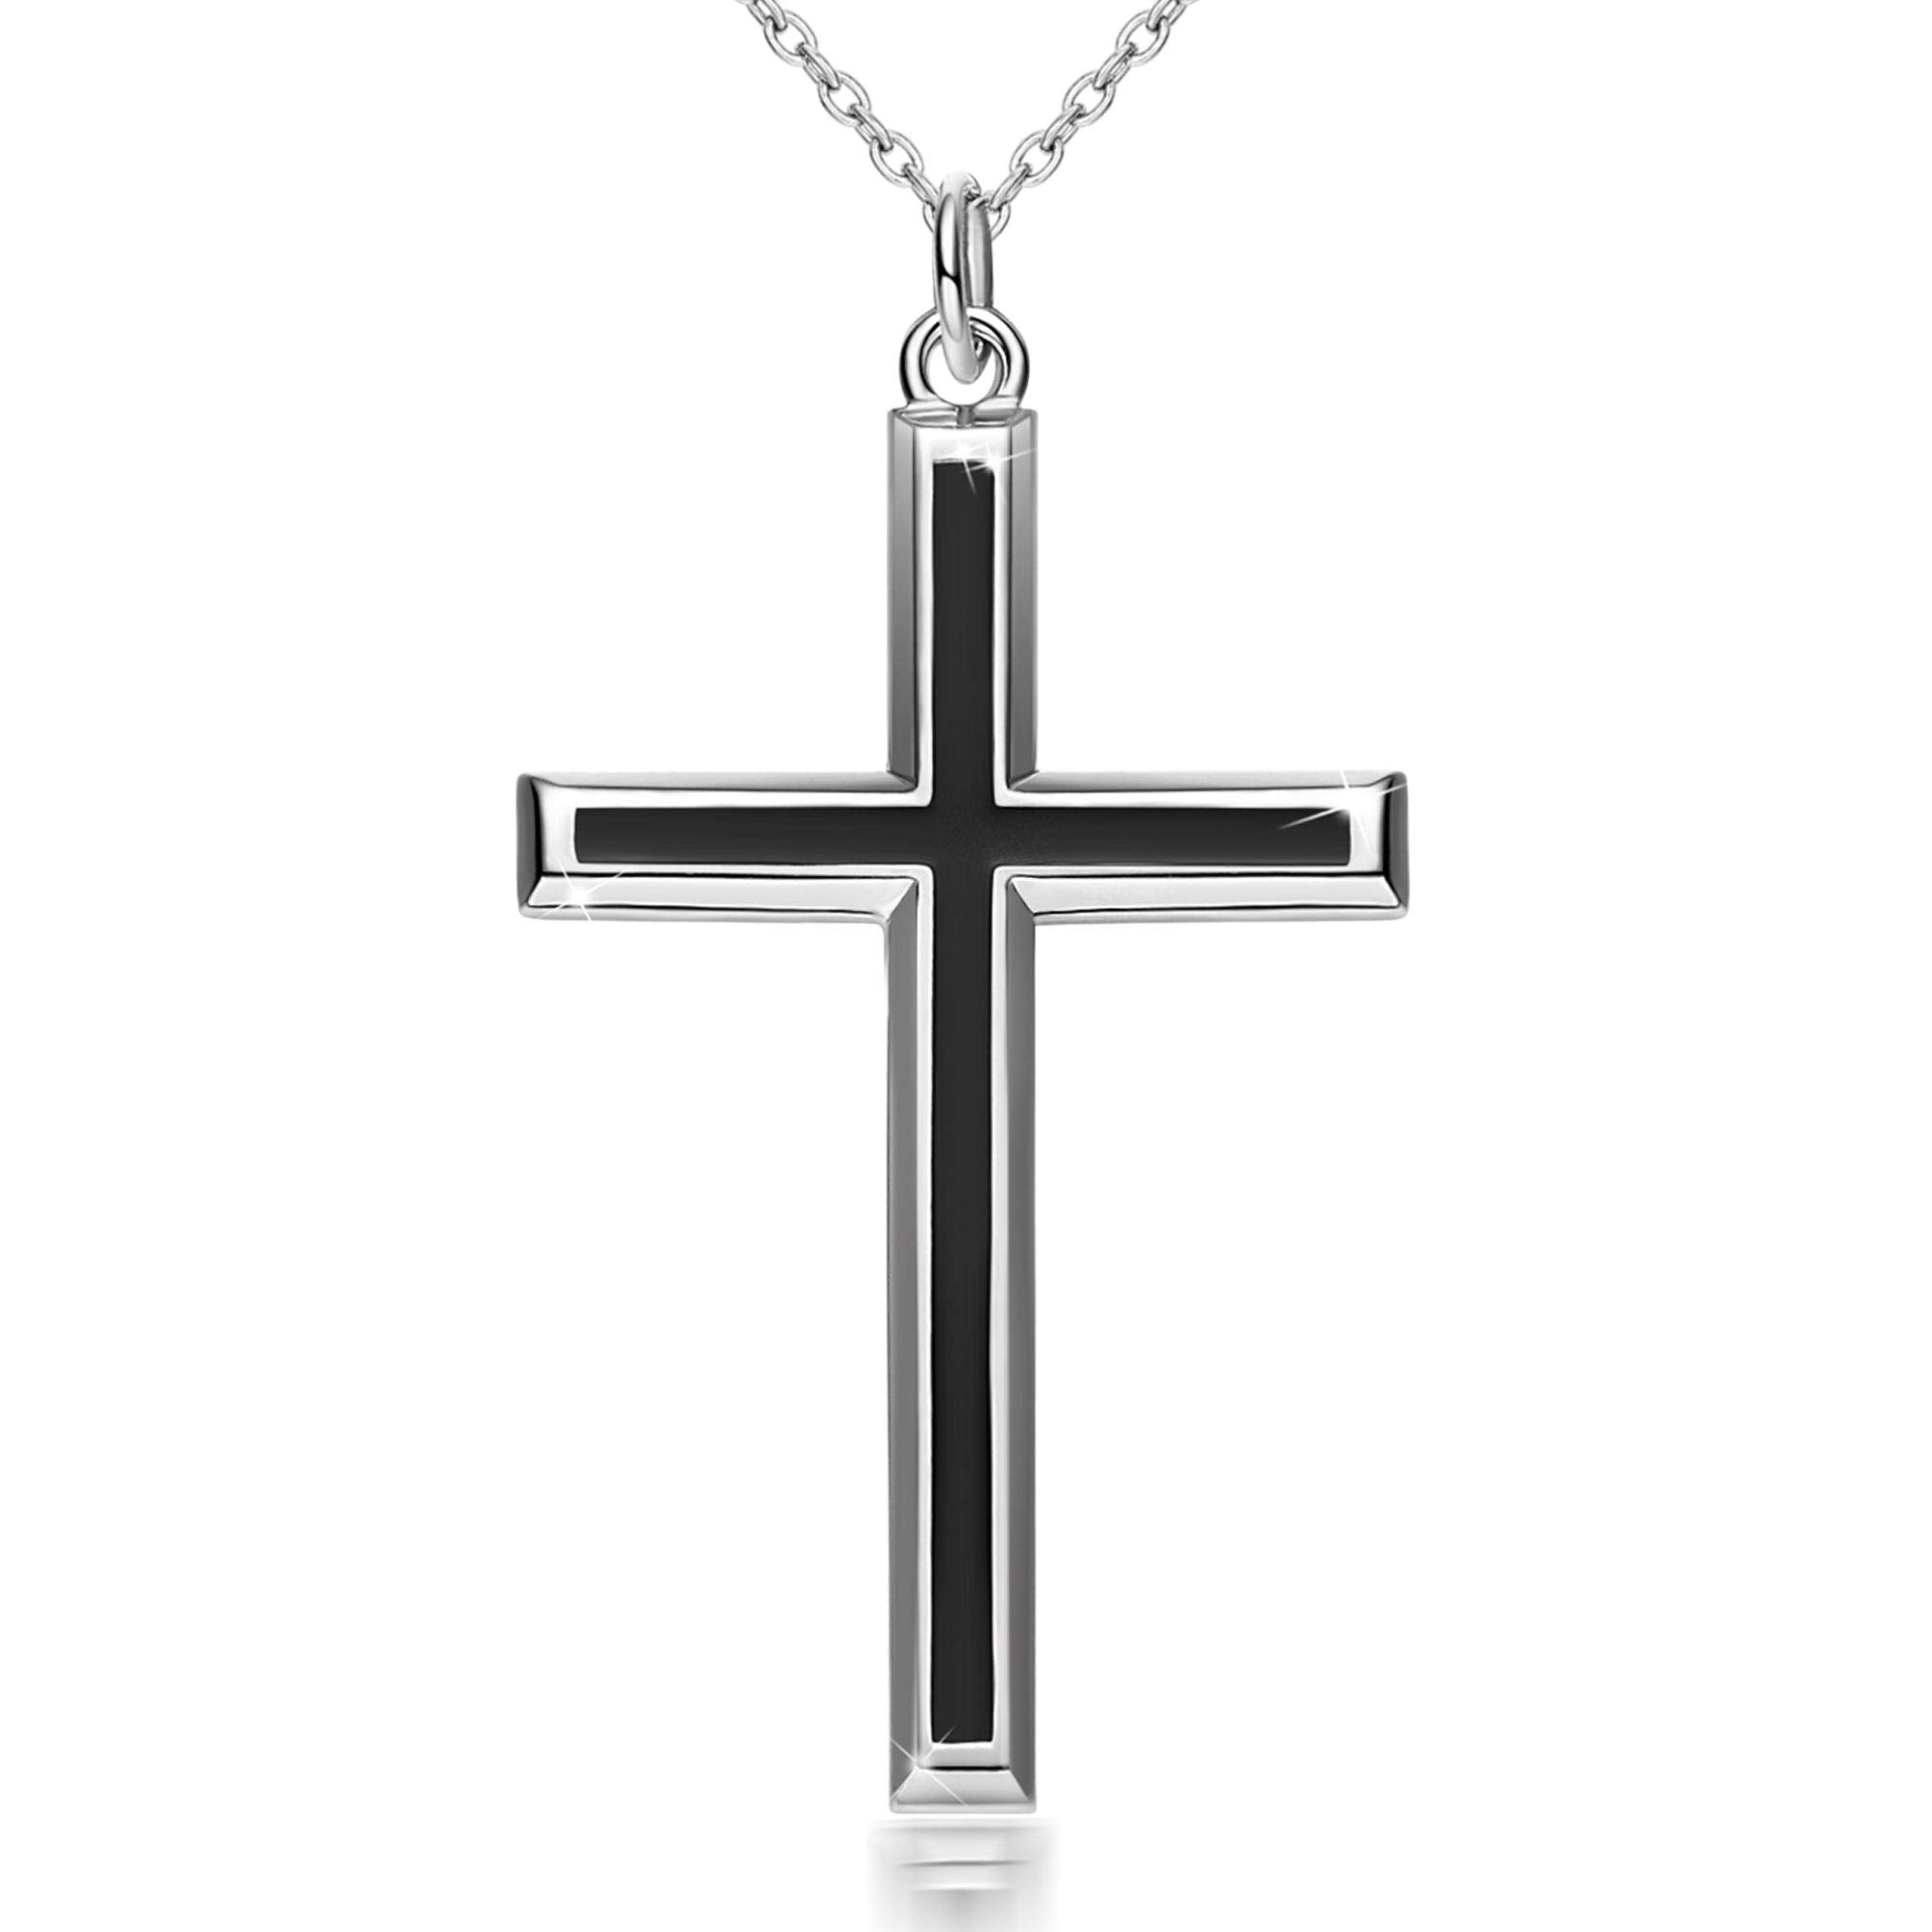 GDDX Sterling Silver Mens Silver Chains Cross Necklace Pendant For Men Jewellery 24"Chain